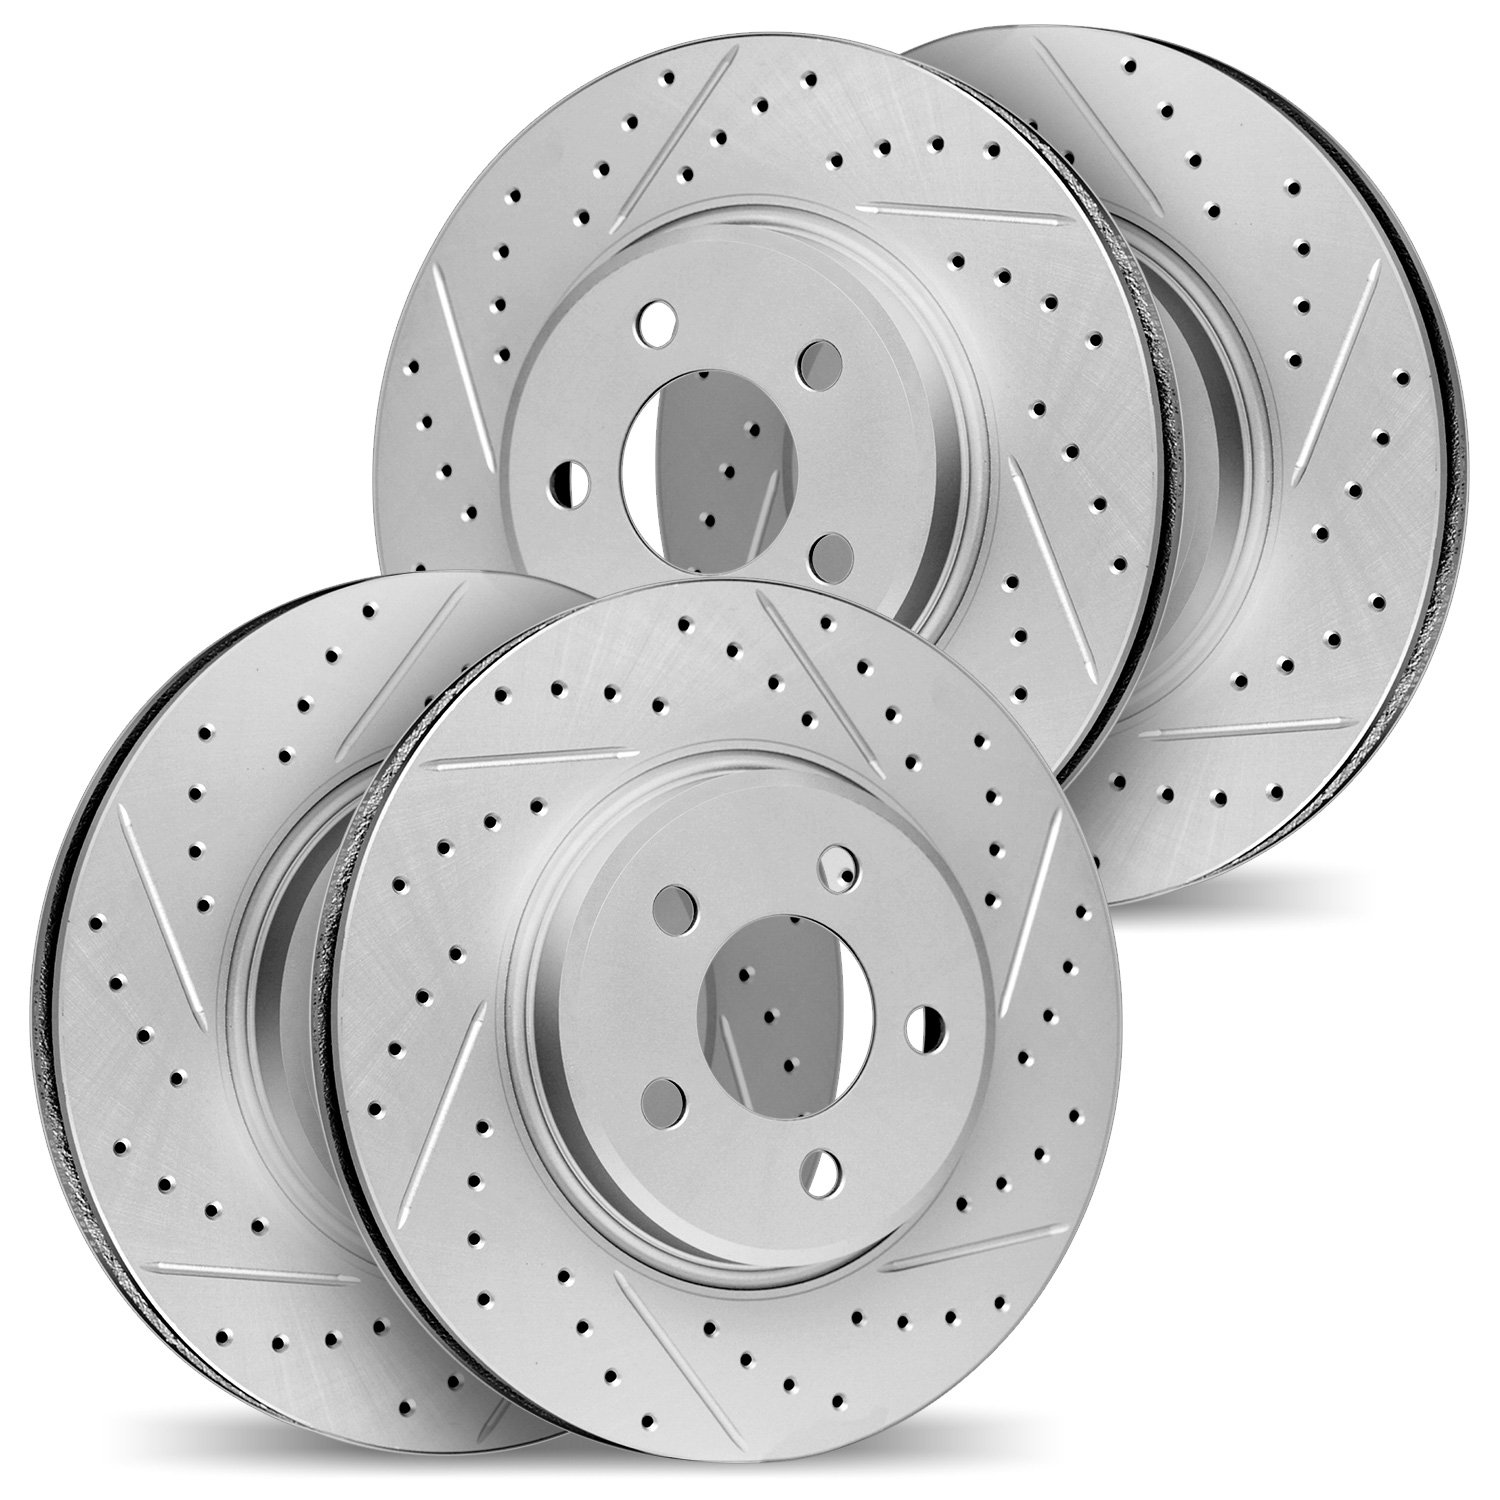 2004-20006 Geoperformance Drilled/Slotted Brake Rotors, Fits Select Jaguar, Position: Front and Rear